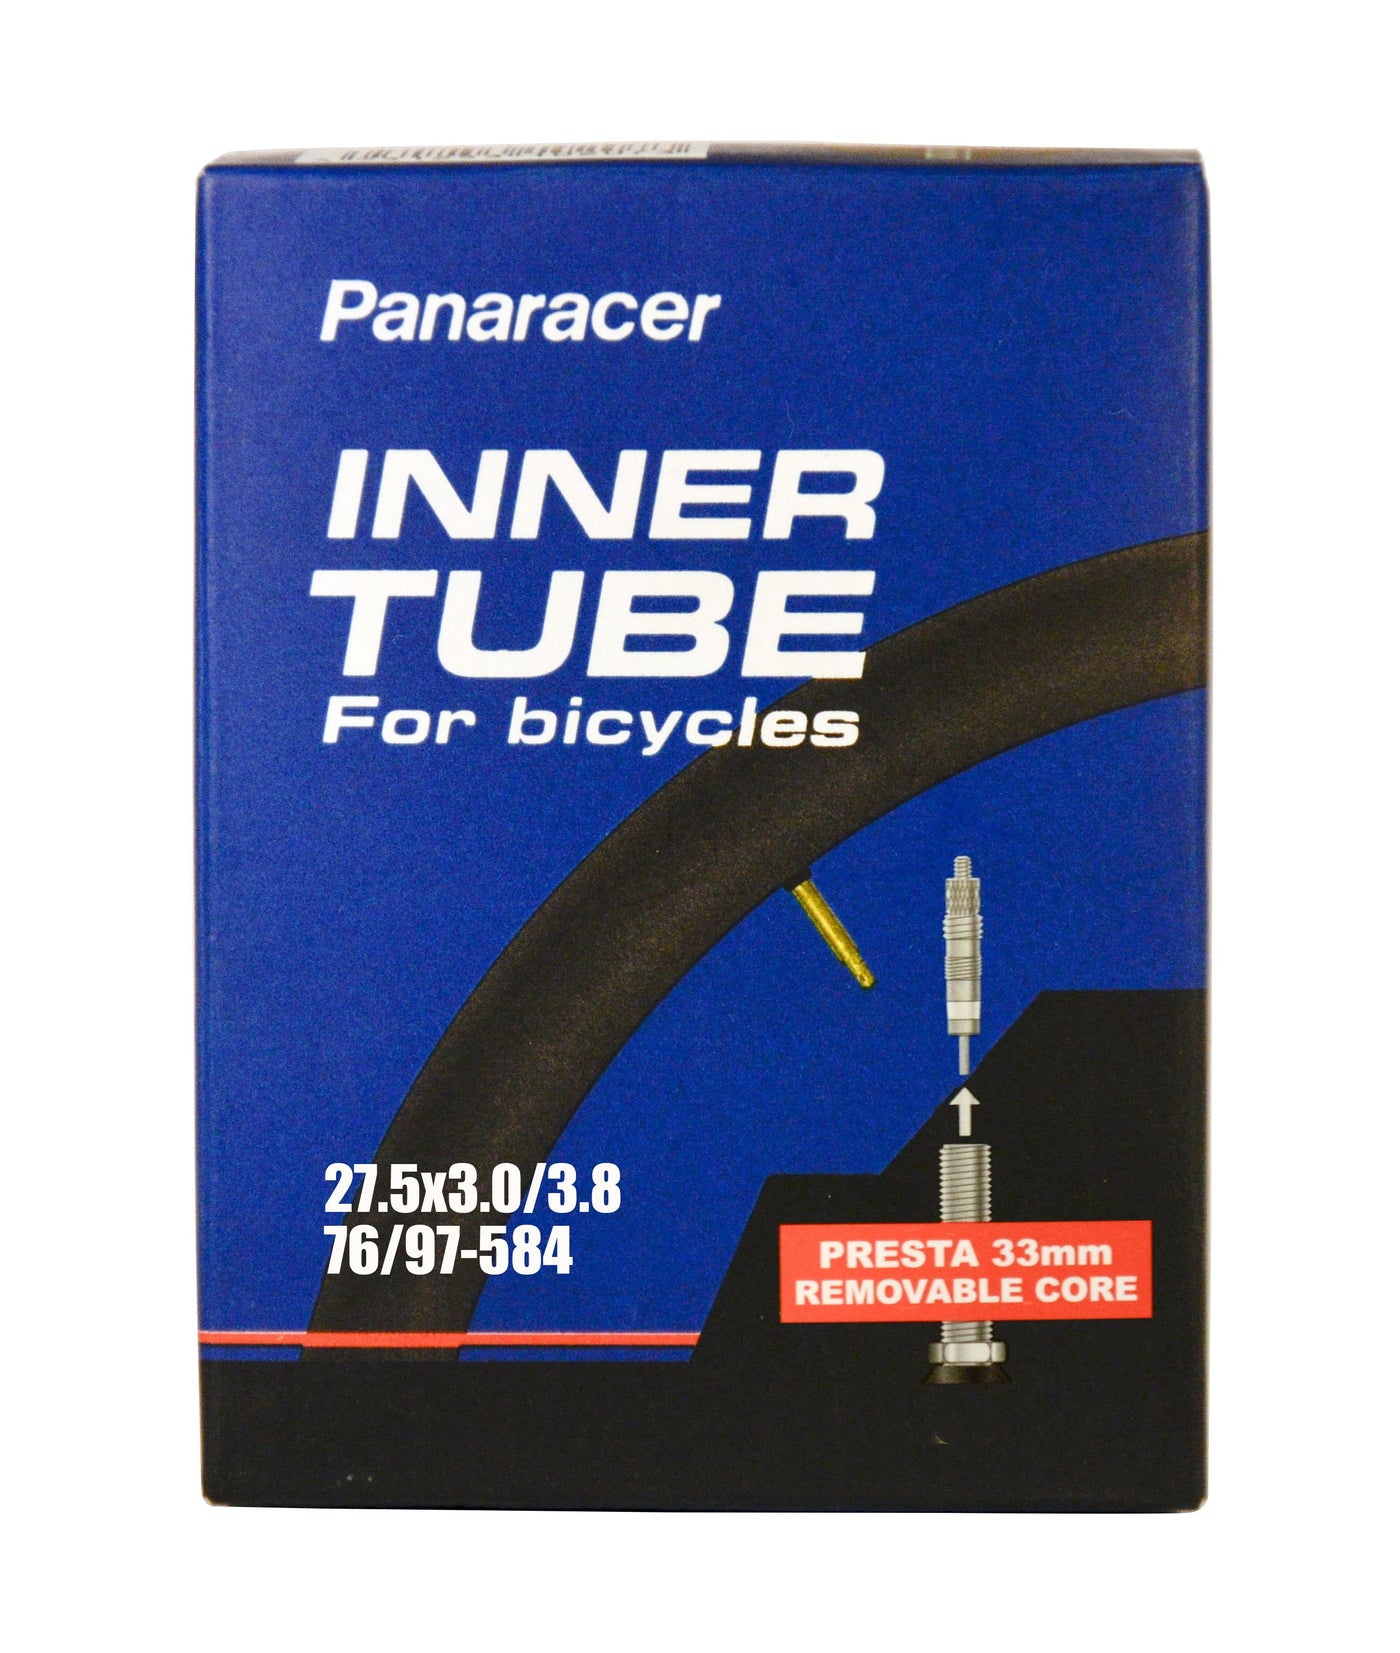 Removable-Core Bicycle Tube | Presta (French) valve